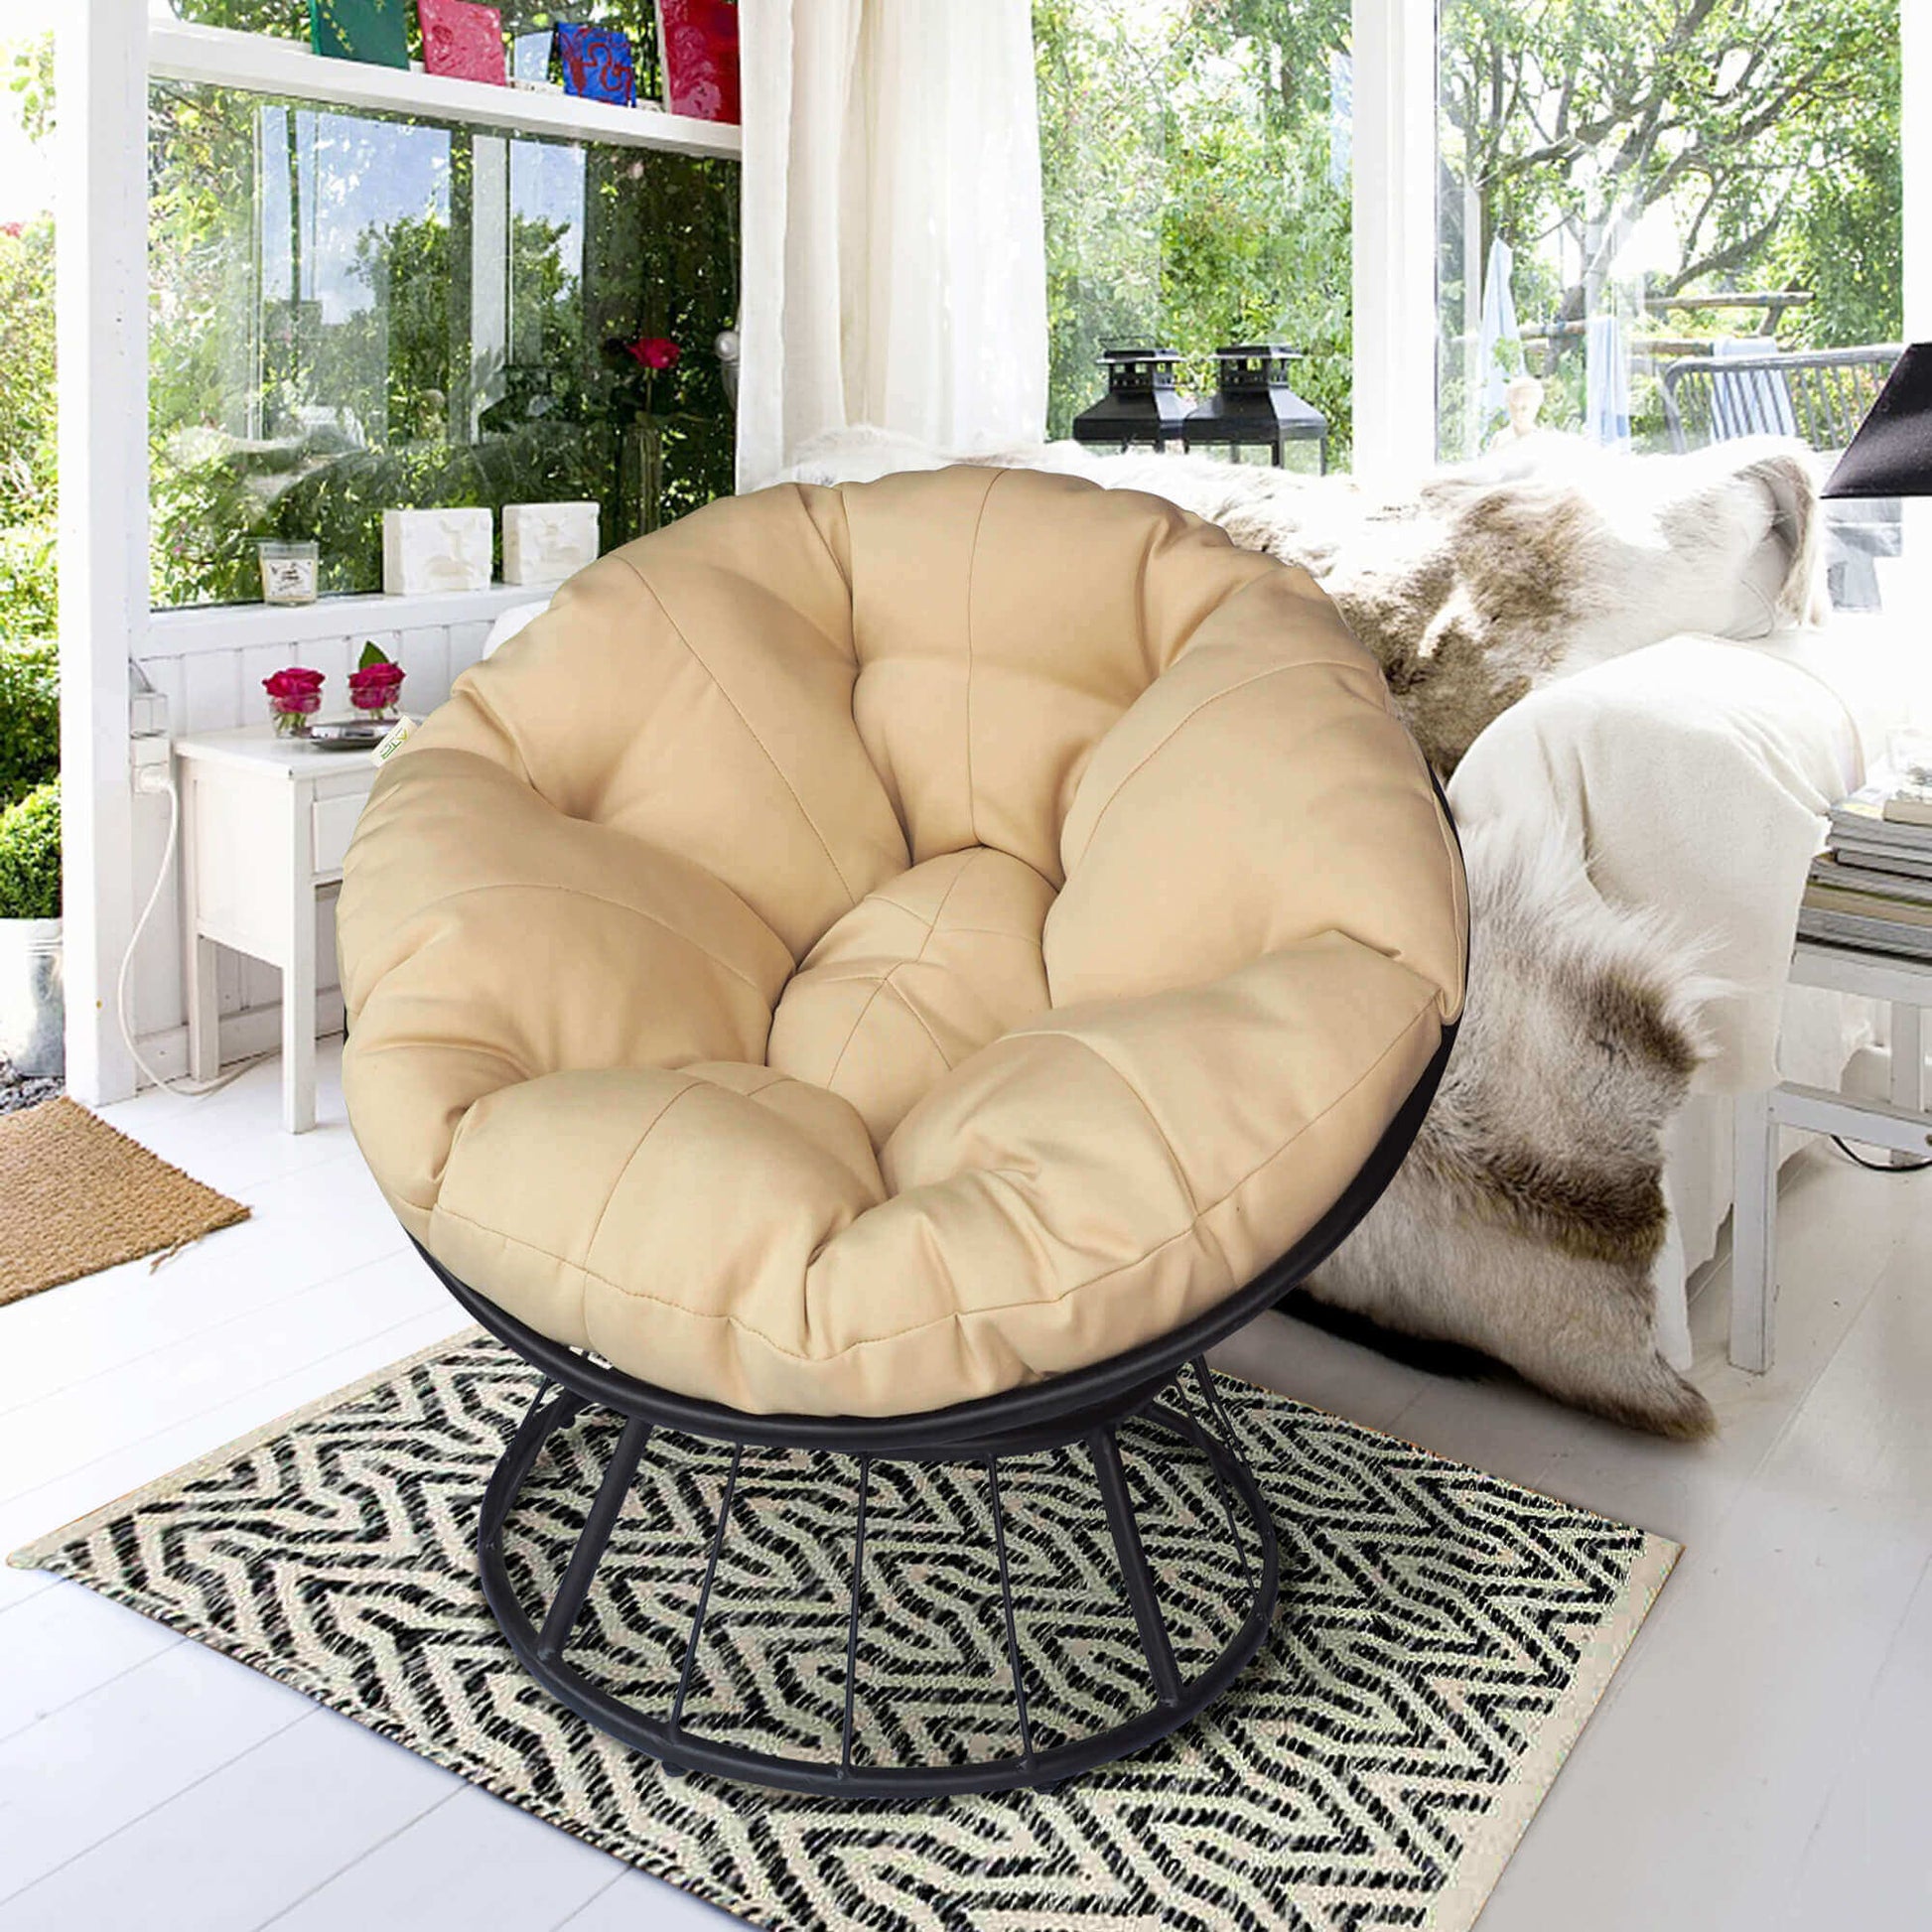 Arttoreal Swivel Papasan Chair Thickness Cushions / Indoor Outdoor Furniture Chair Deep Seating Moon Chair Solid Twill Fabric